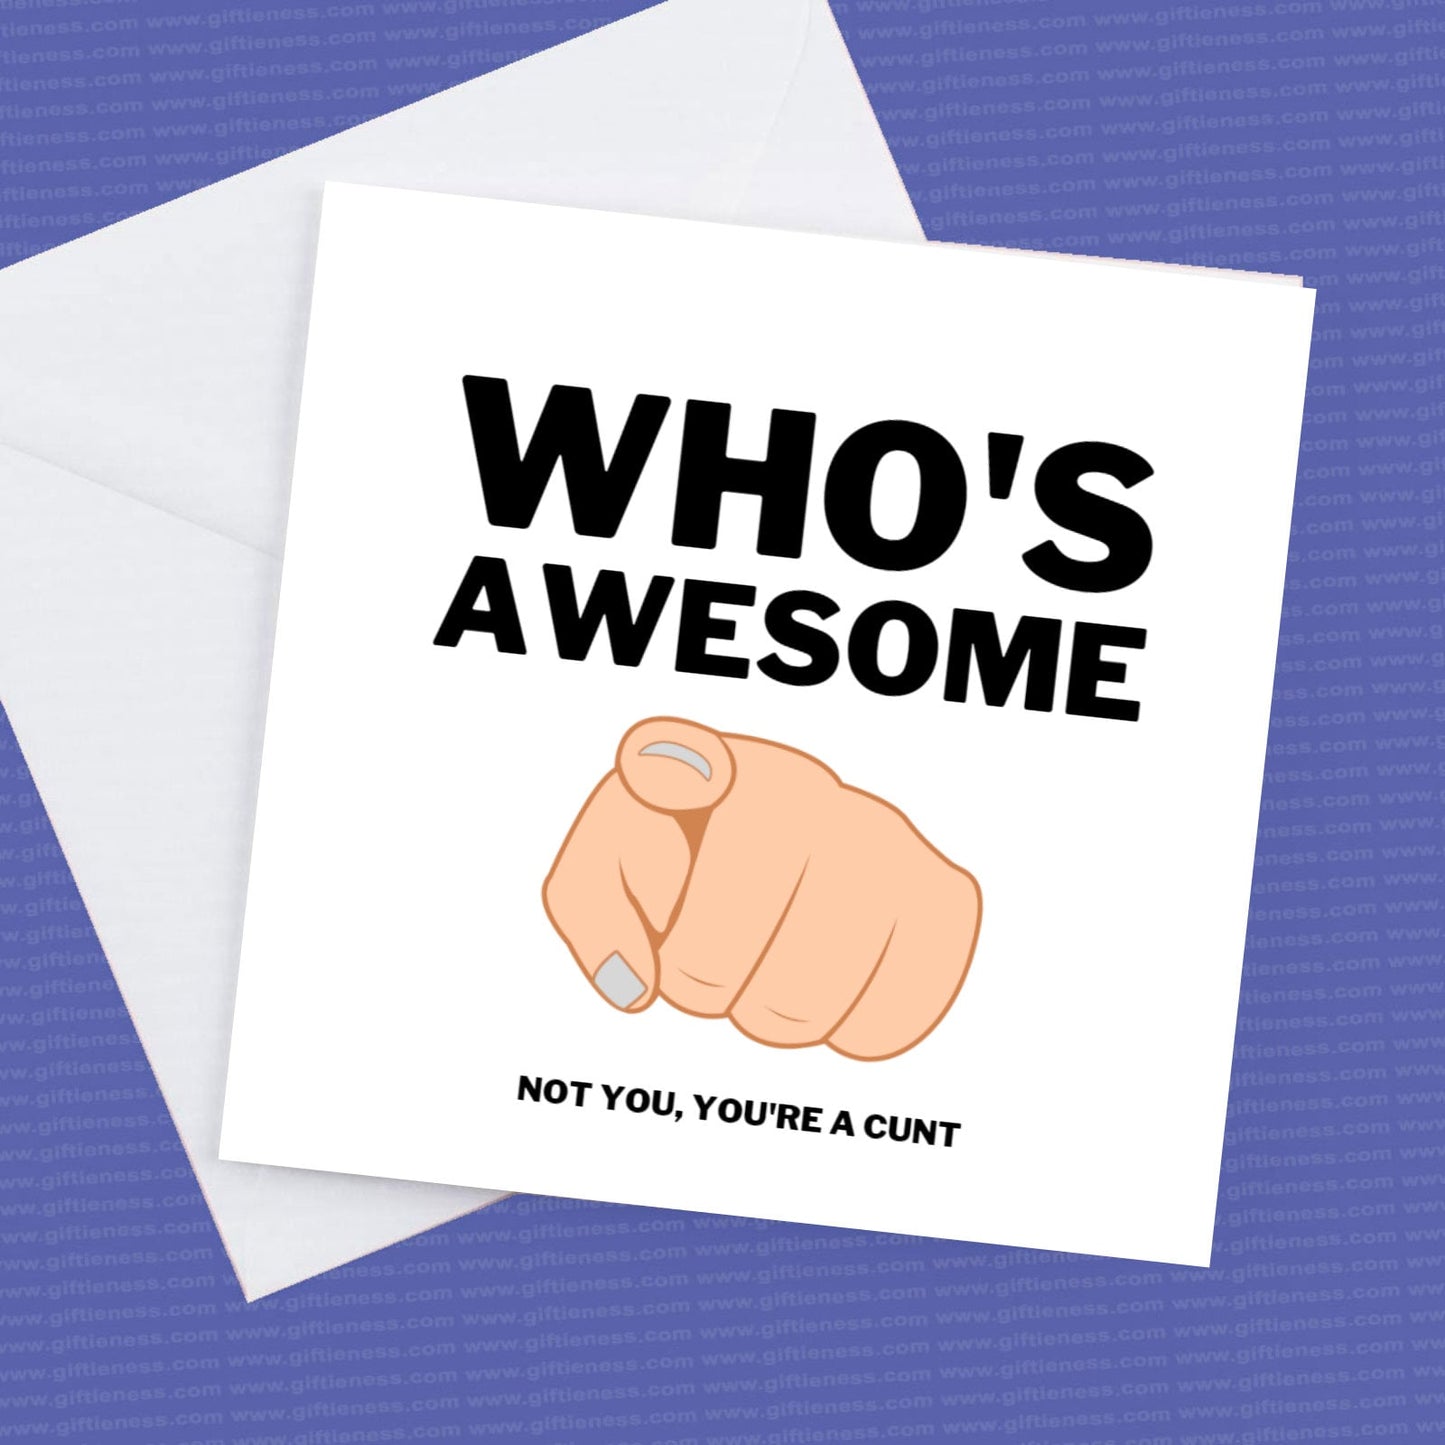 Who's awesome not you you're a cunt card